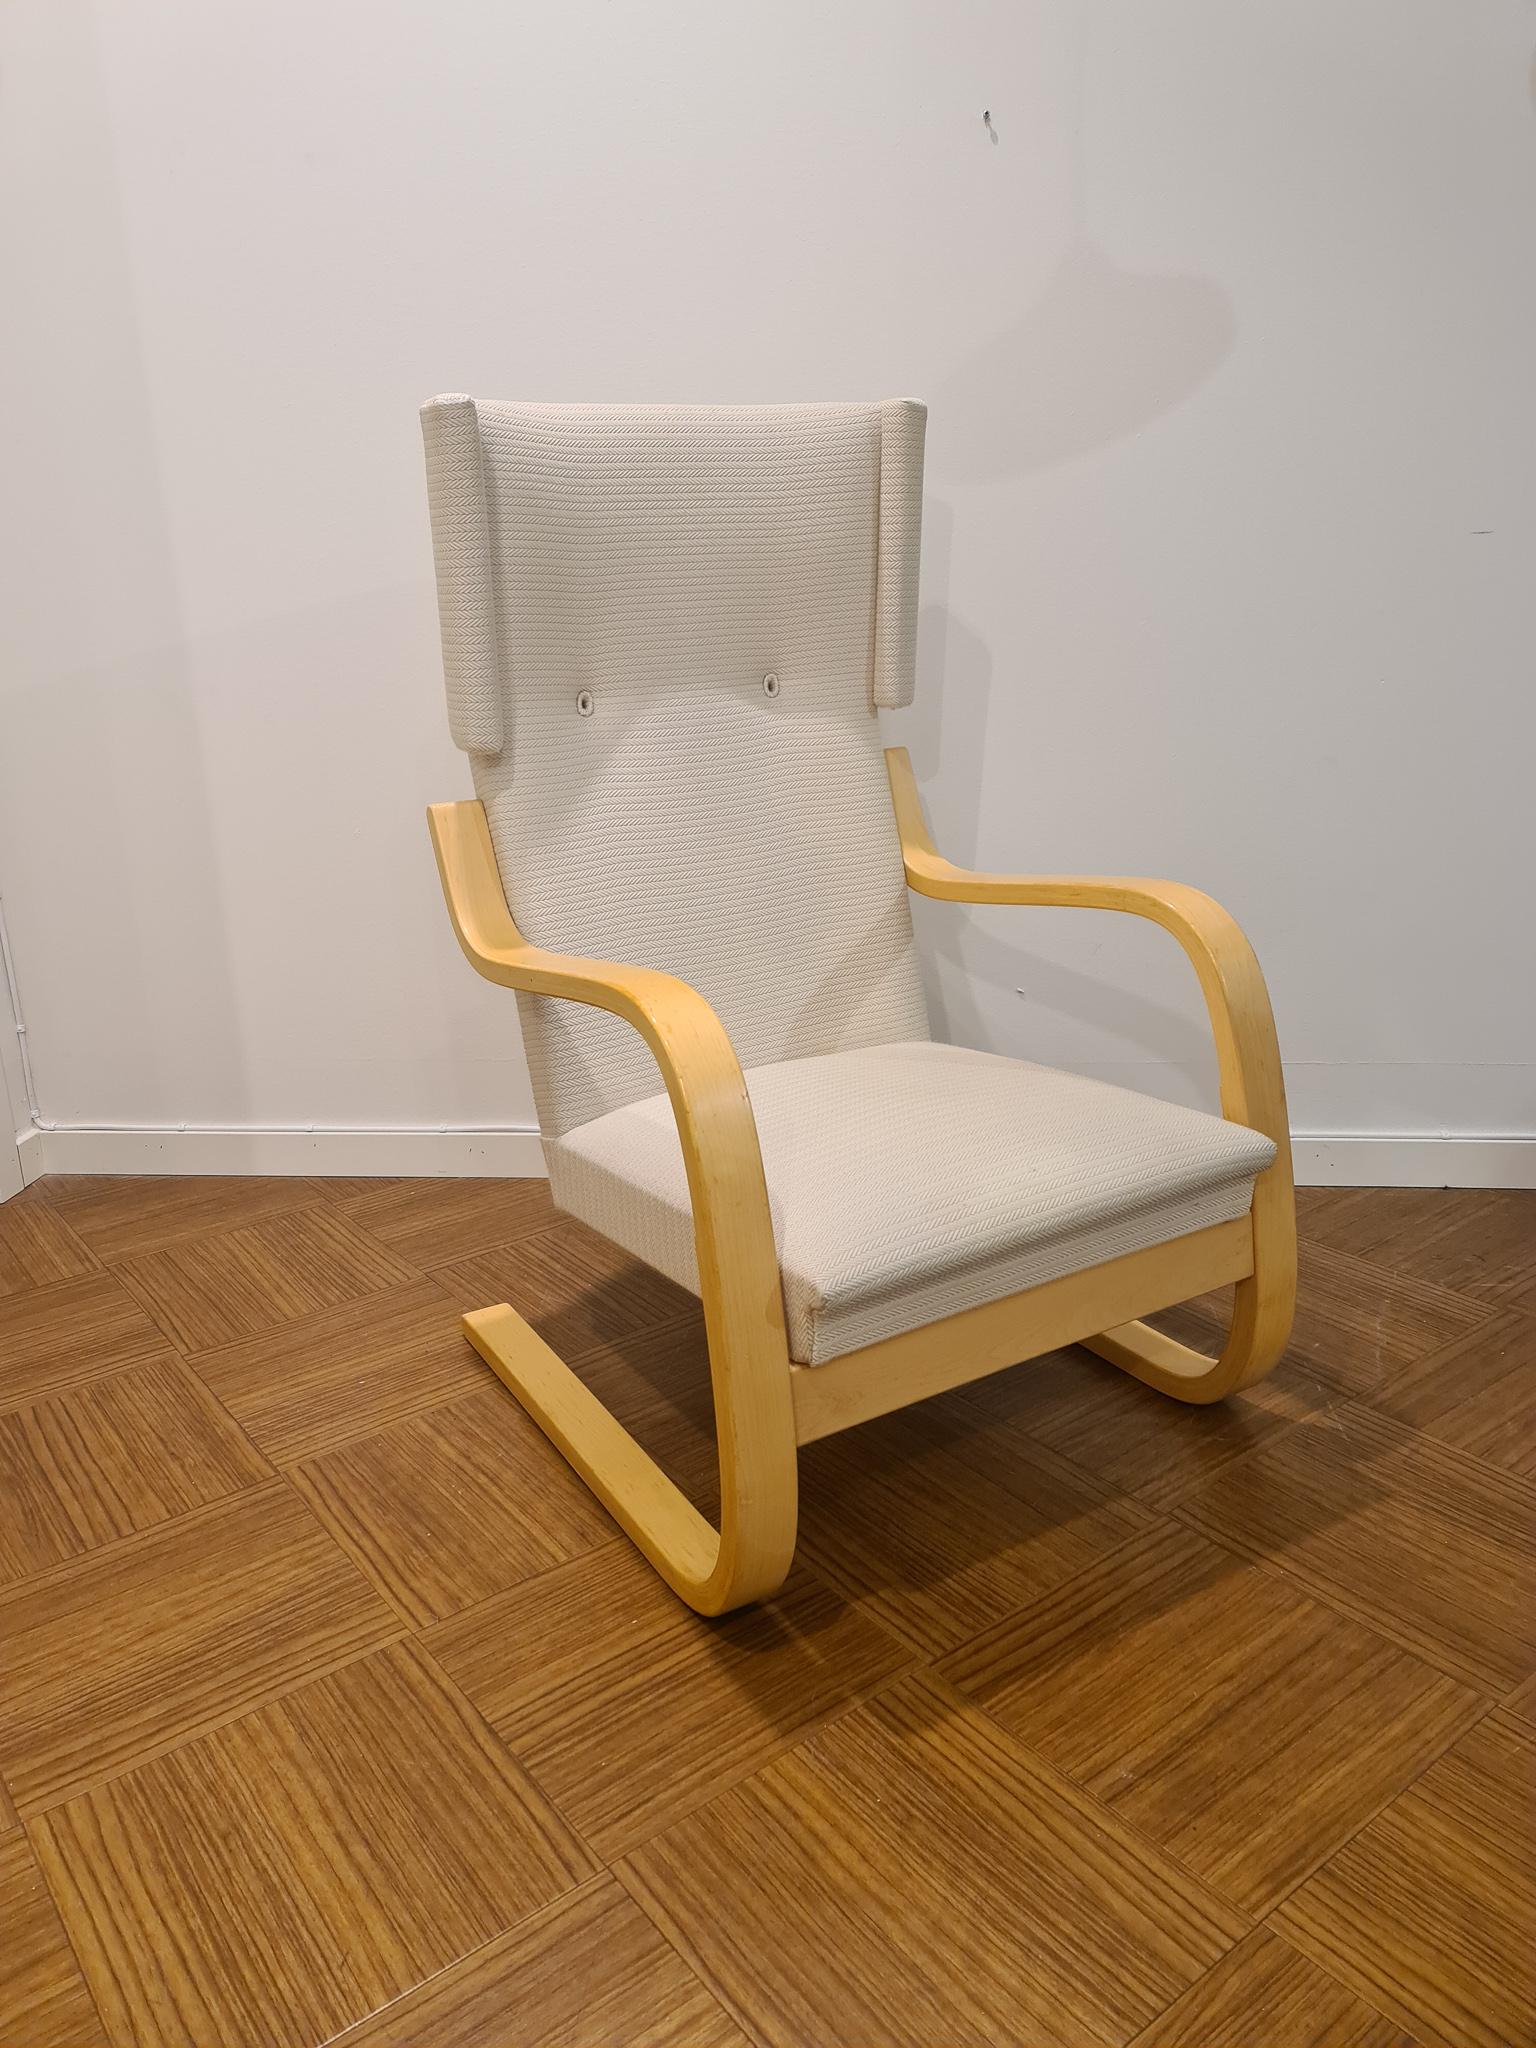 This wingback lounge chair model 401 were designed by Alvar Aalto for Artek, Finland, 1933. With a birch plywood frame and white/grey fabric. This version of the chairs was produced in the 1970s and have the number engraved under the armrest.